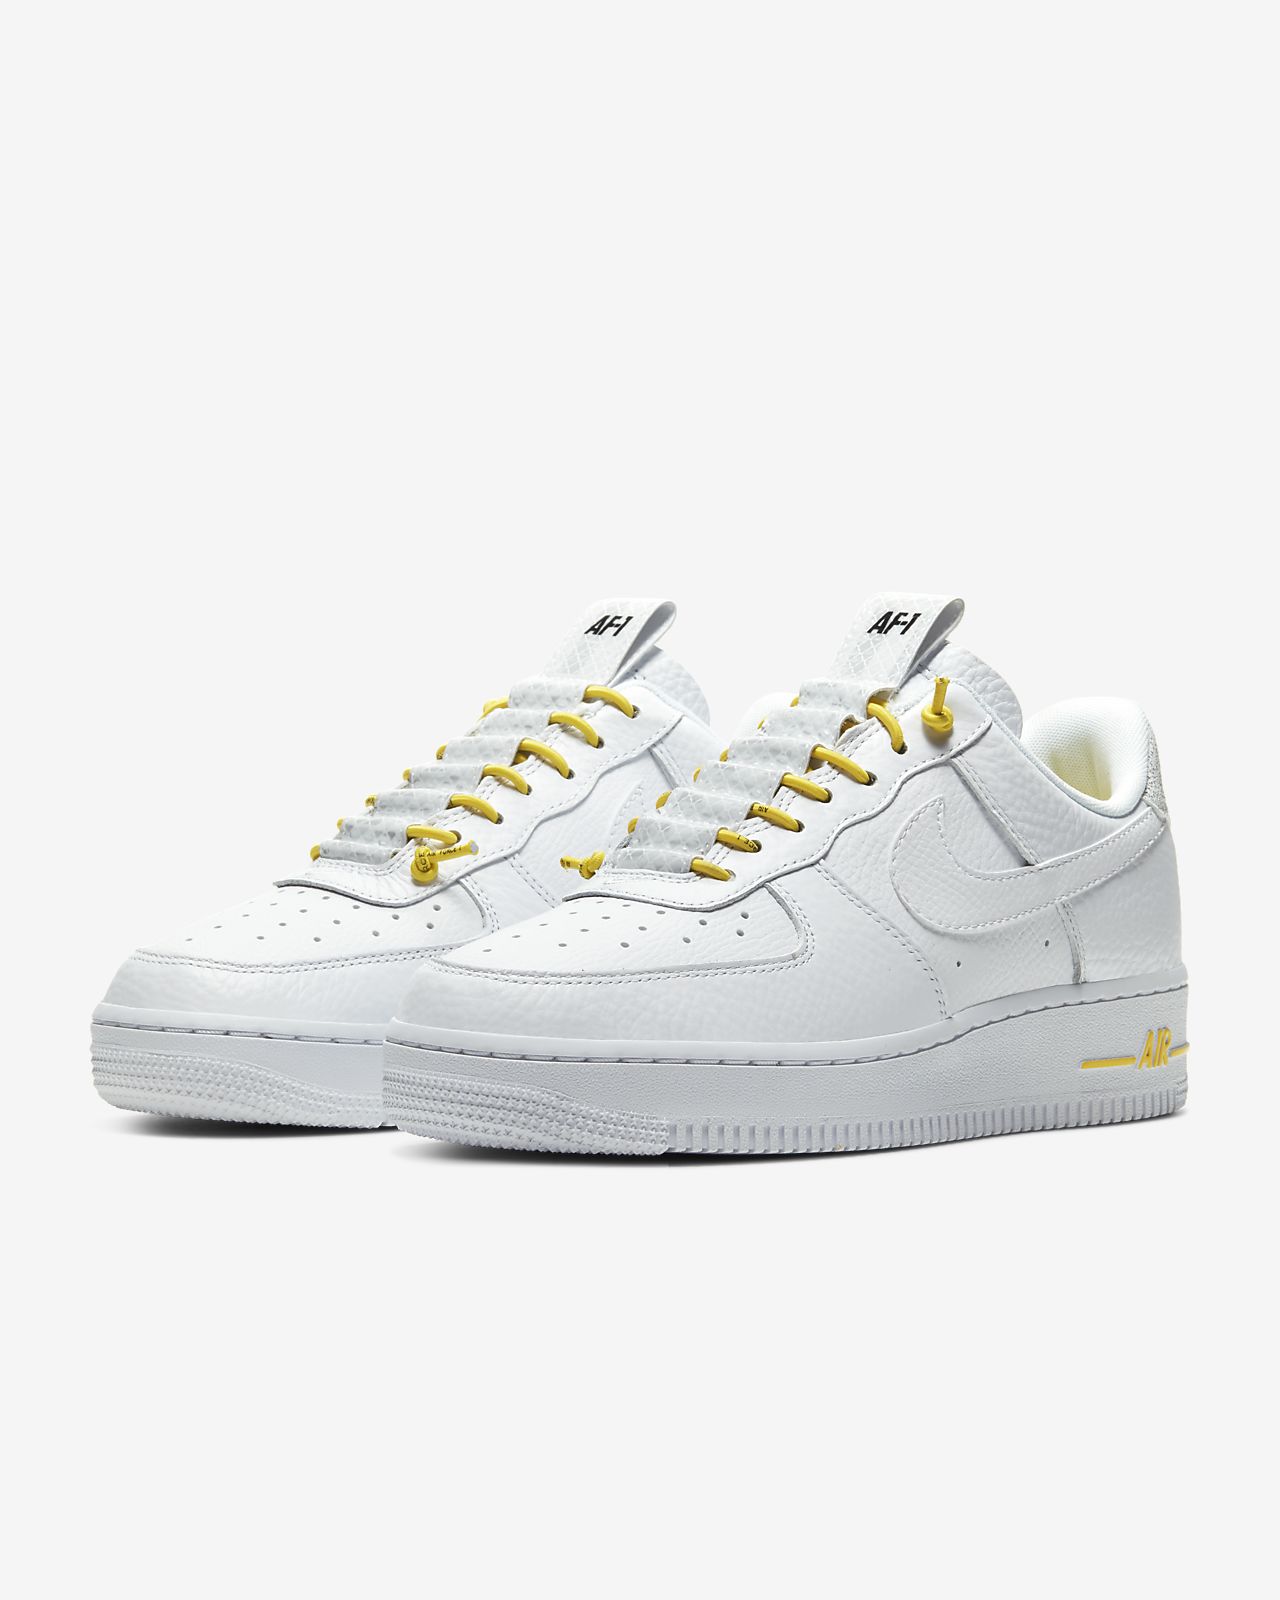 af1 yellow laces